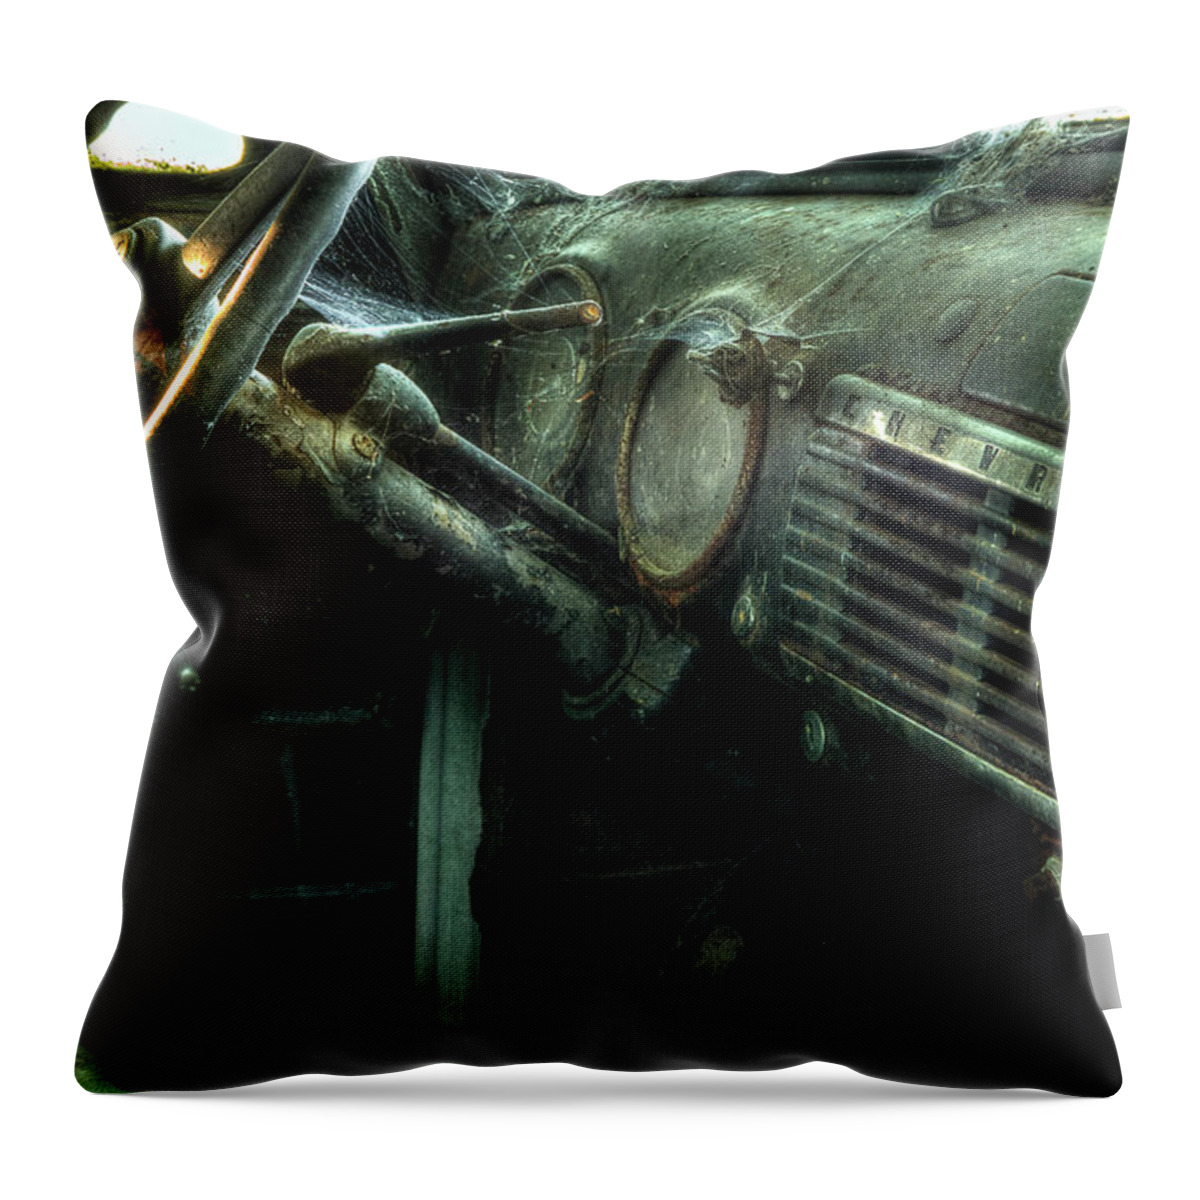 Chevy 3100 Truck Throw Pillow featuring the photograph Chevy Truck 3100 by Mike Eingle